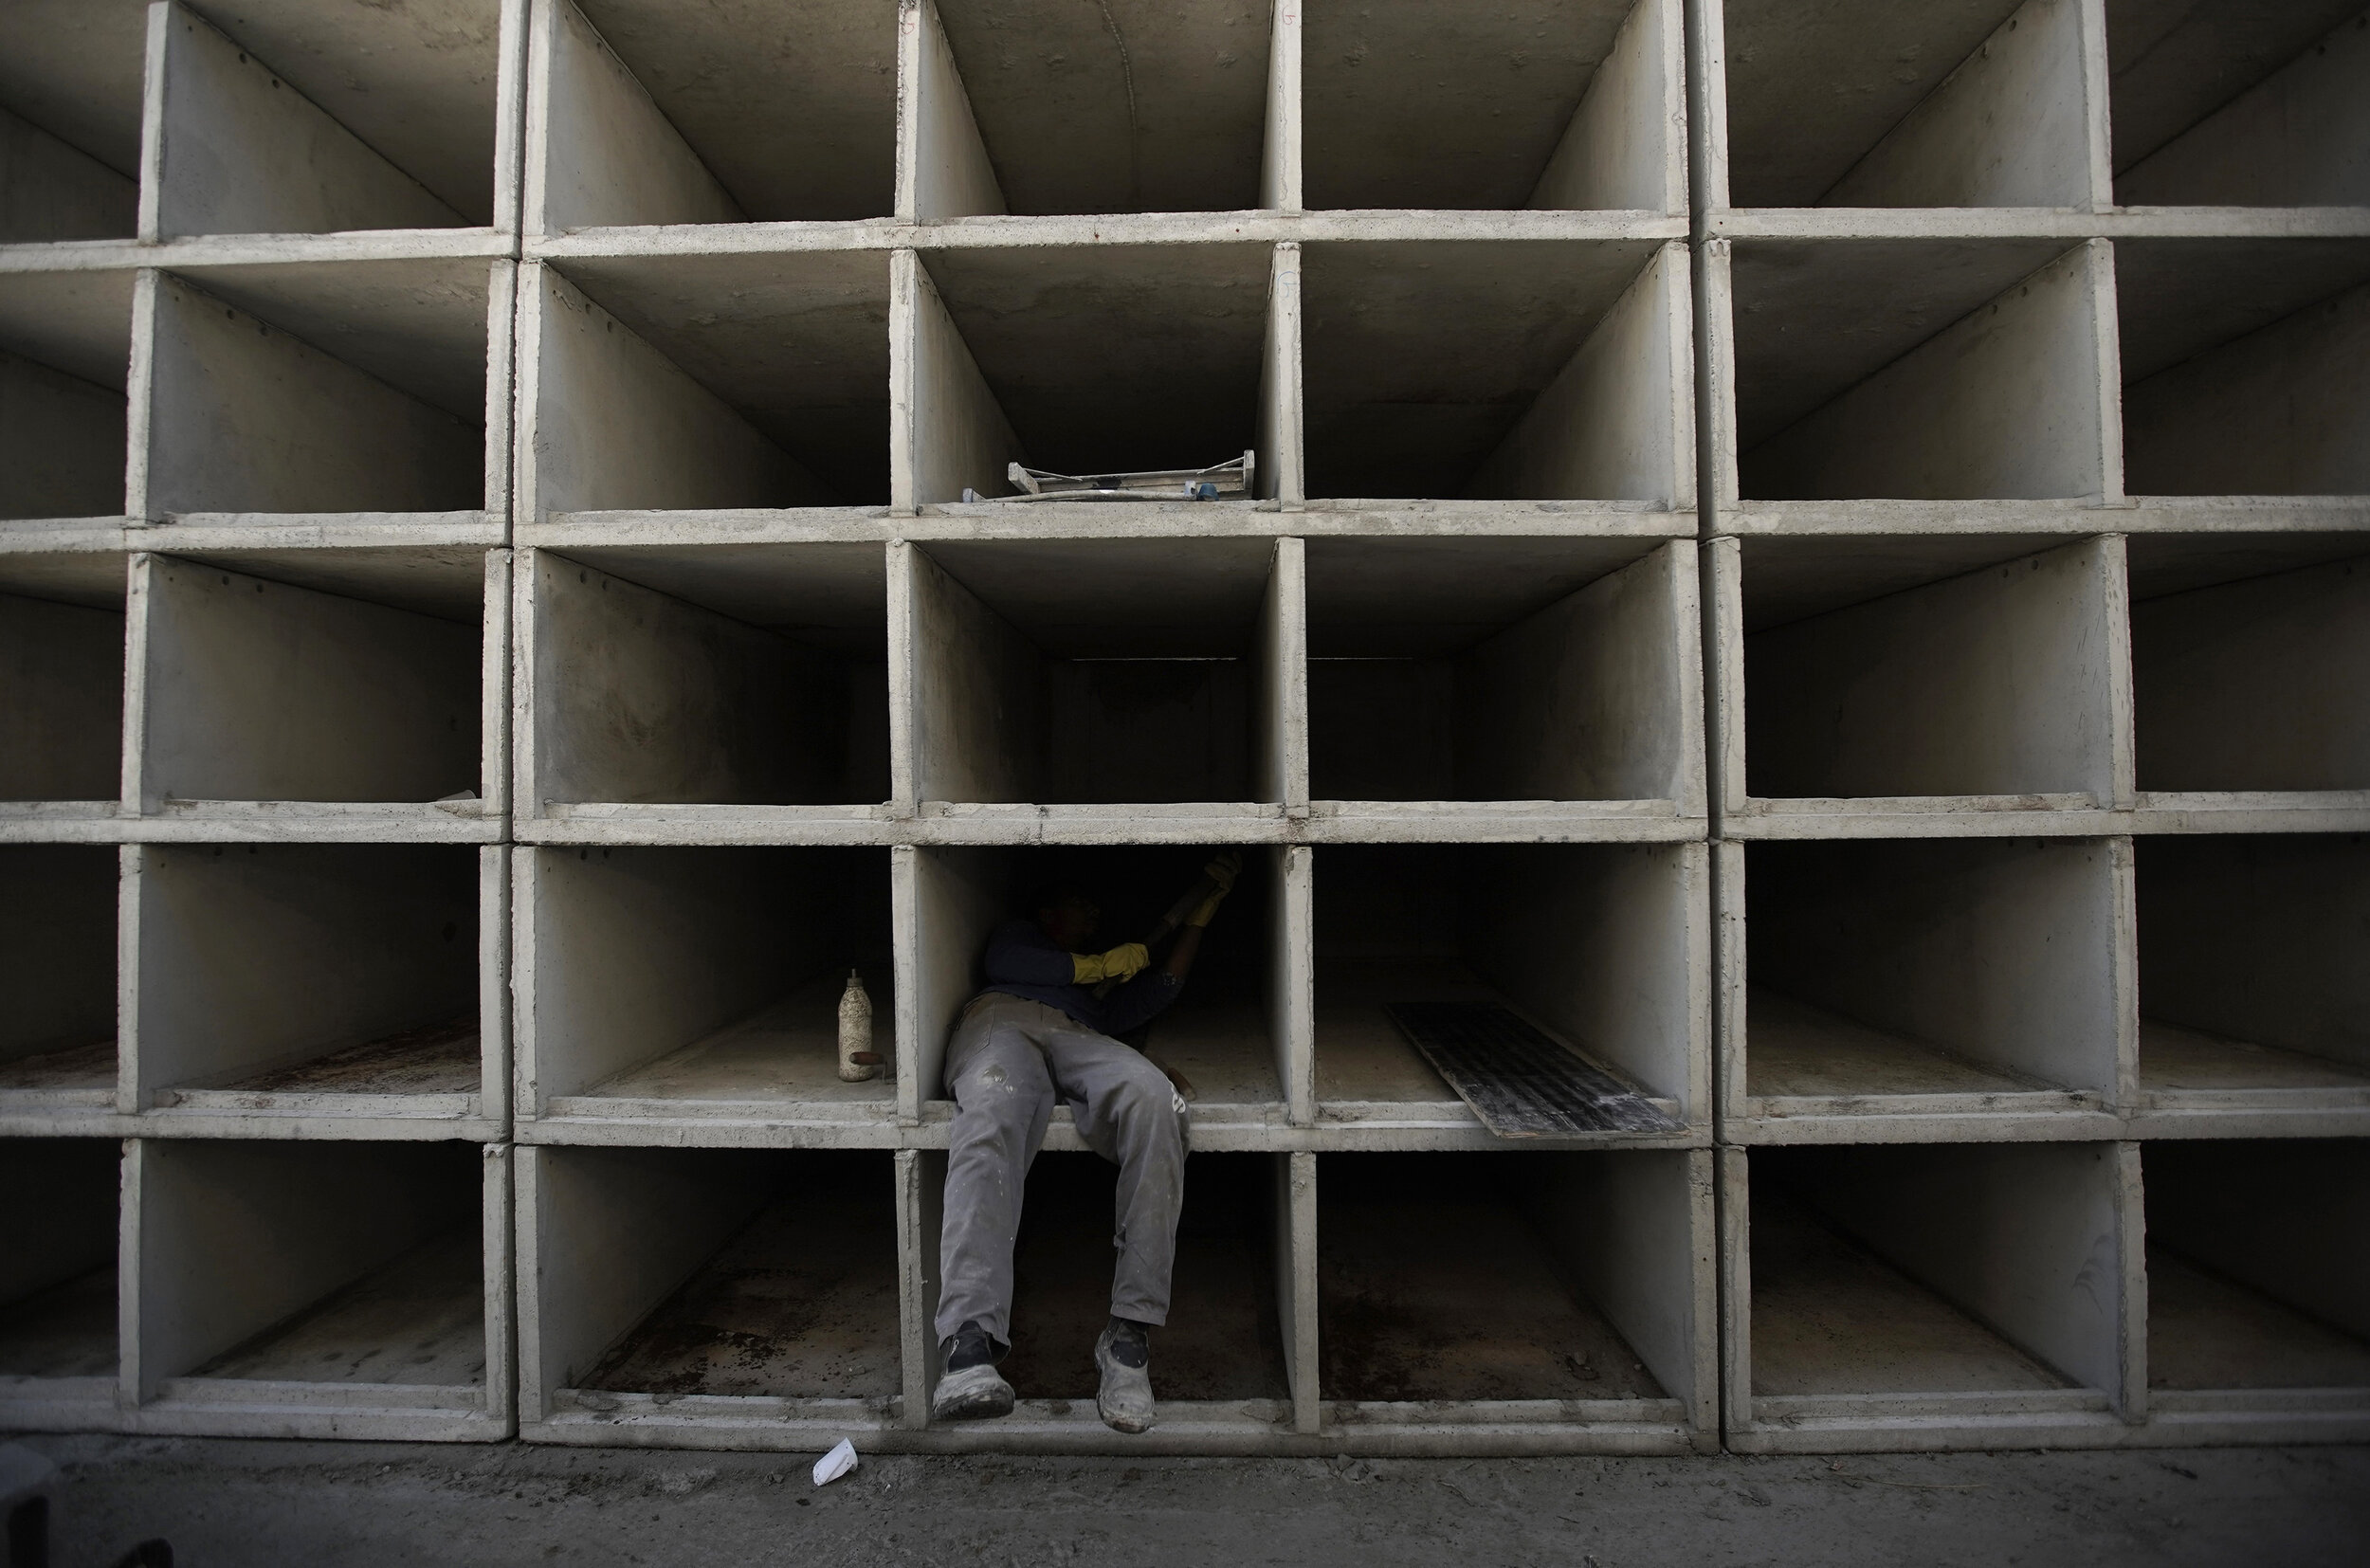  A worker builds niches at the Caju Cemetery in Rio de Janeiro, Brazil, Monday, April 20, 2020. There were already plans this year to create more tombs at Caju but the new coronavirus pandemic accelerated the construction. (AP Photo/Silvia Izquierdo)